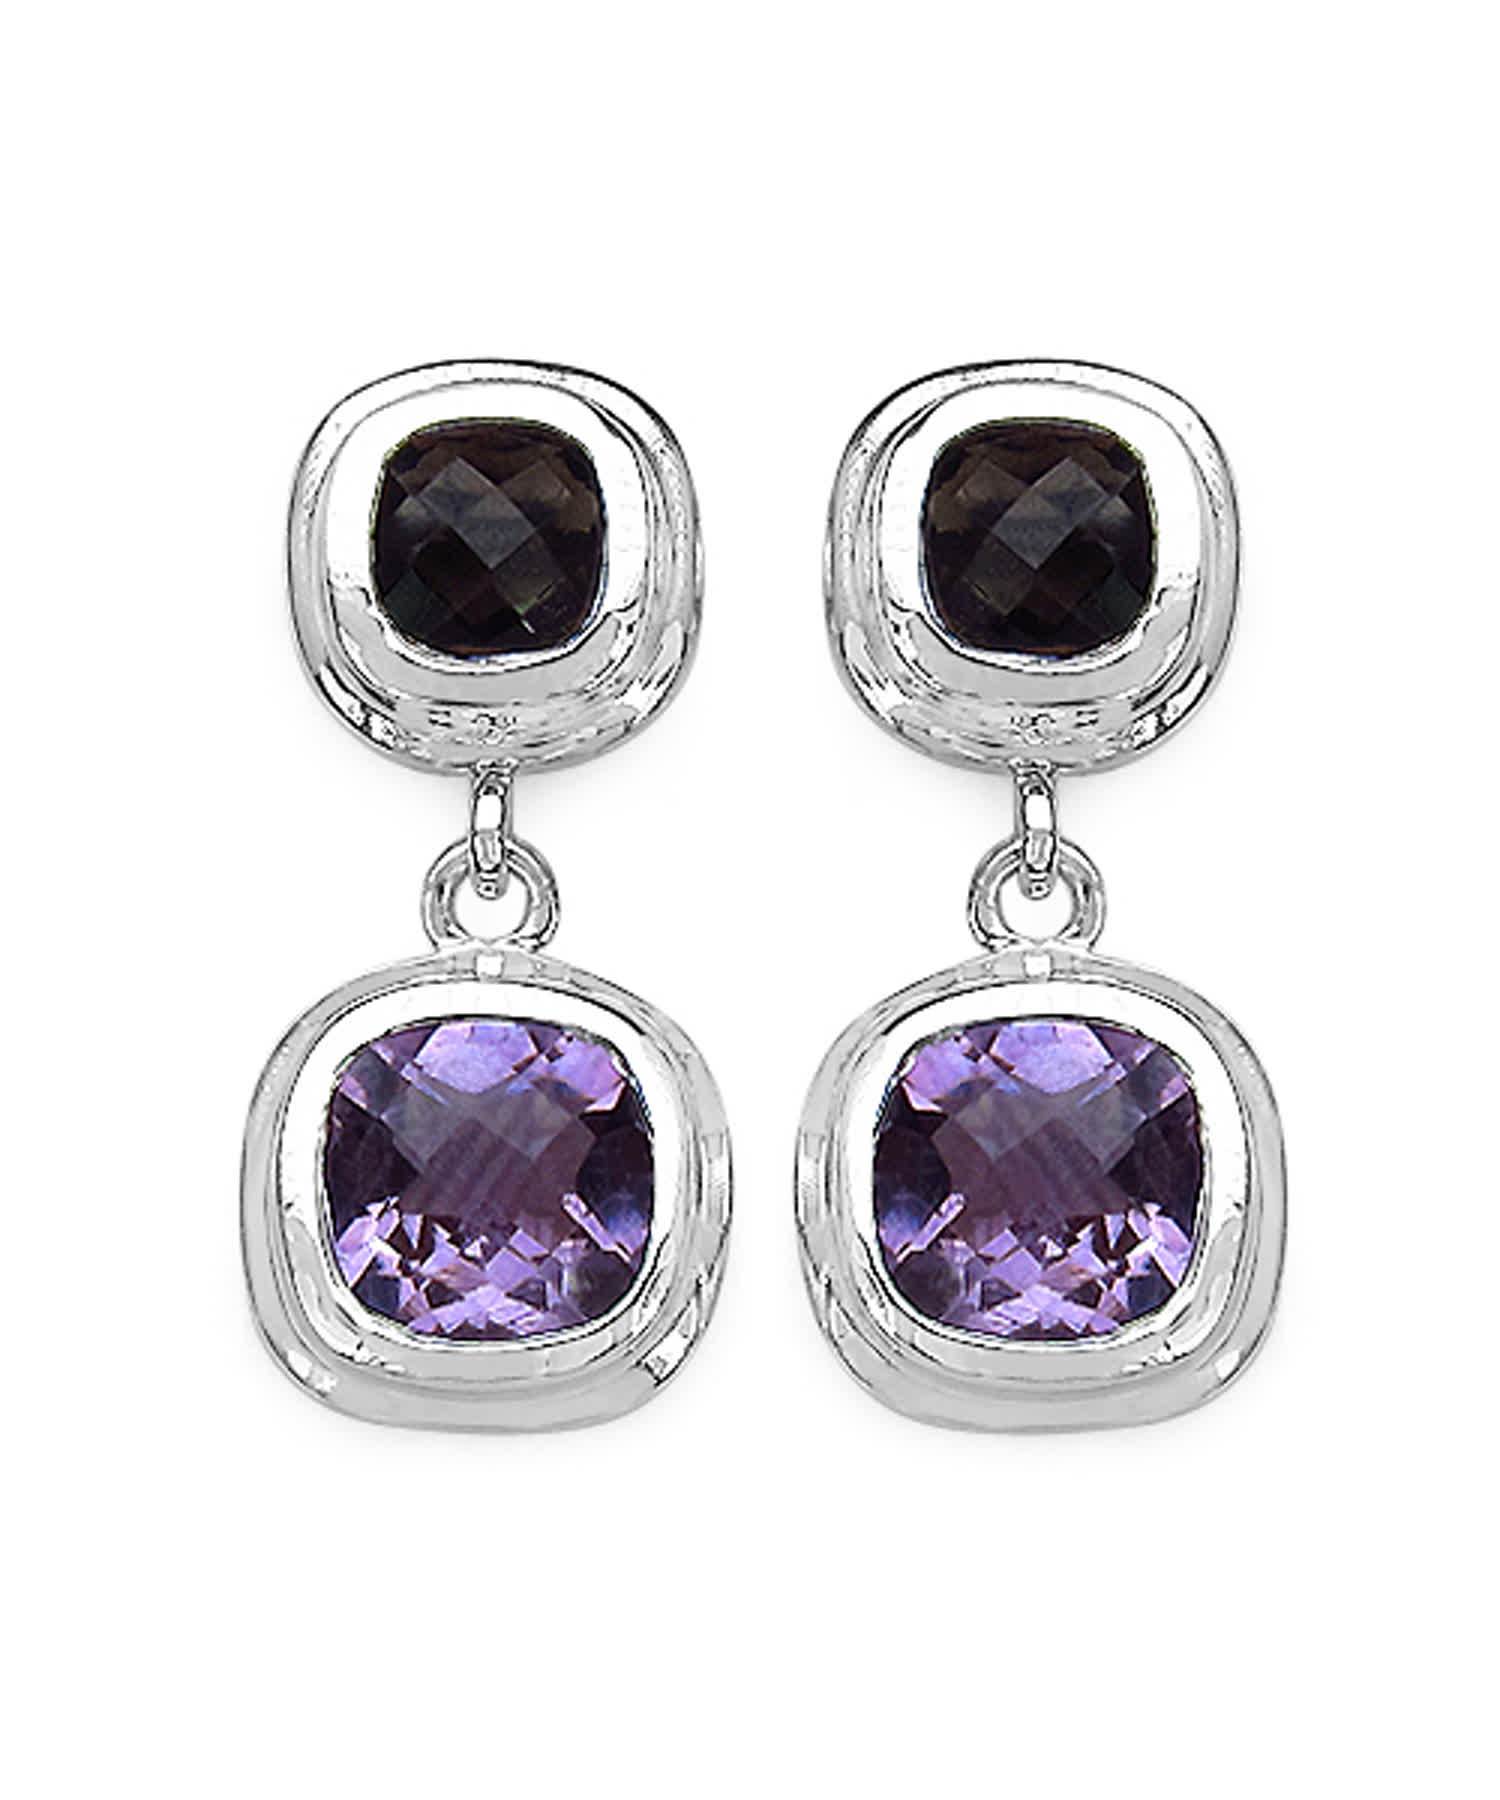 6.70ctw Natural Amethyst and Smoky Quartz Rhodium Plated 925 Sterling Silver Dangle Earrings View 1